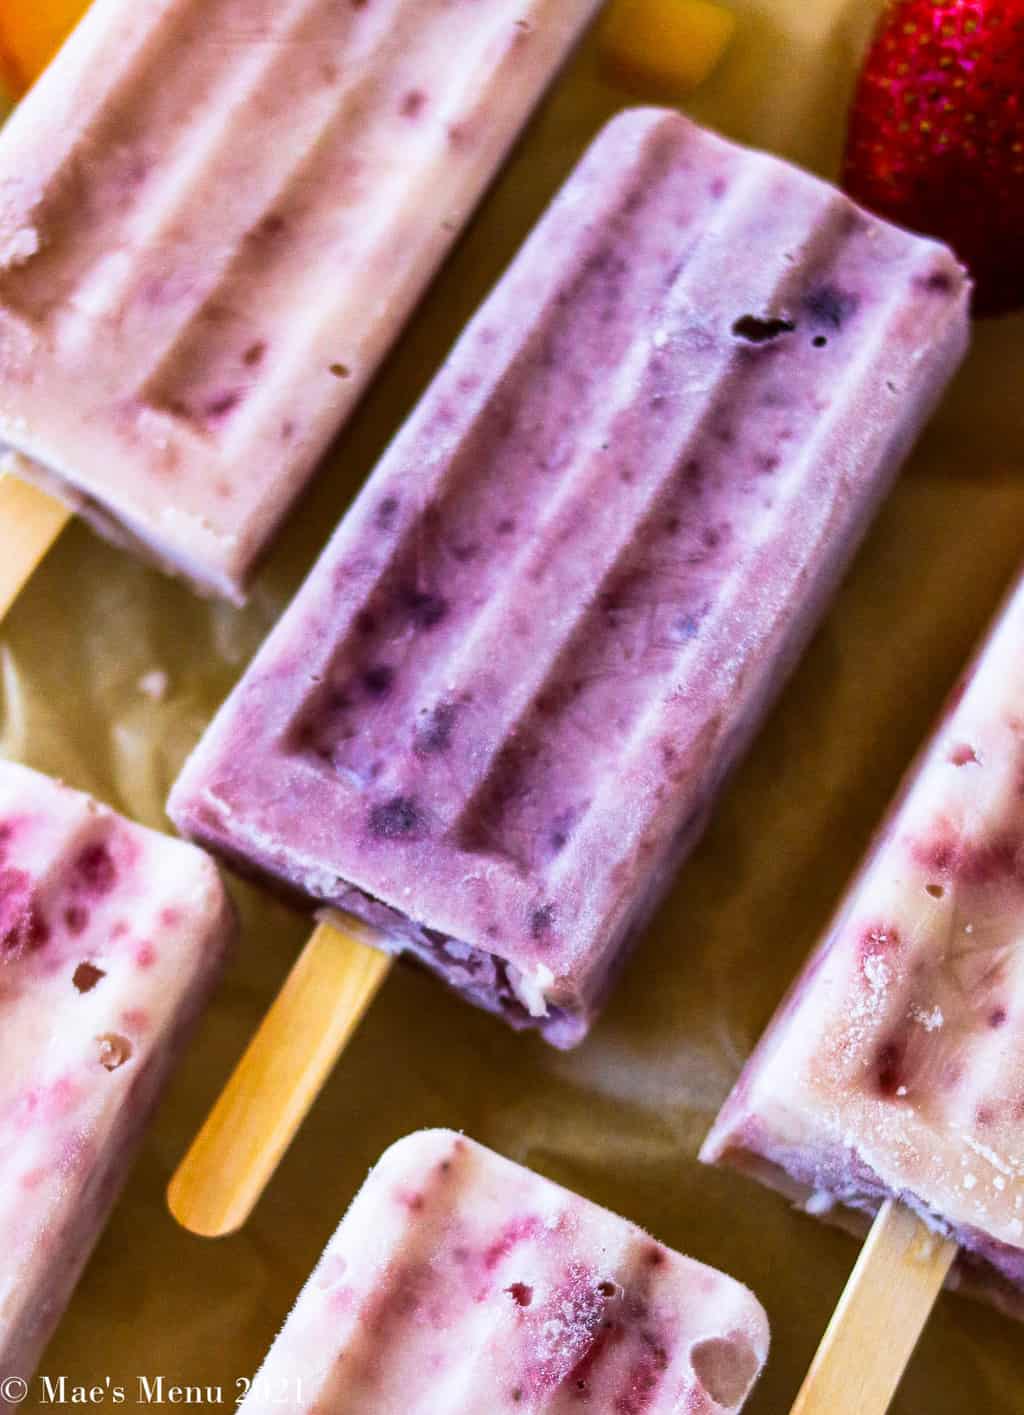 An up close shot of a blueberry popsicle surrounded by other popsicles